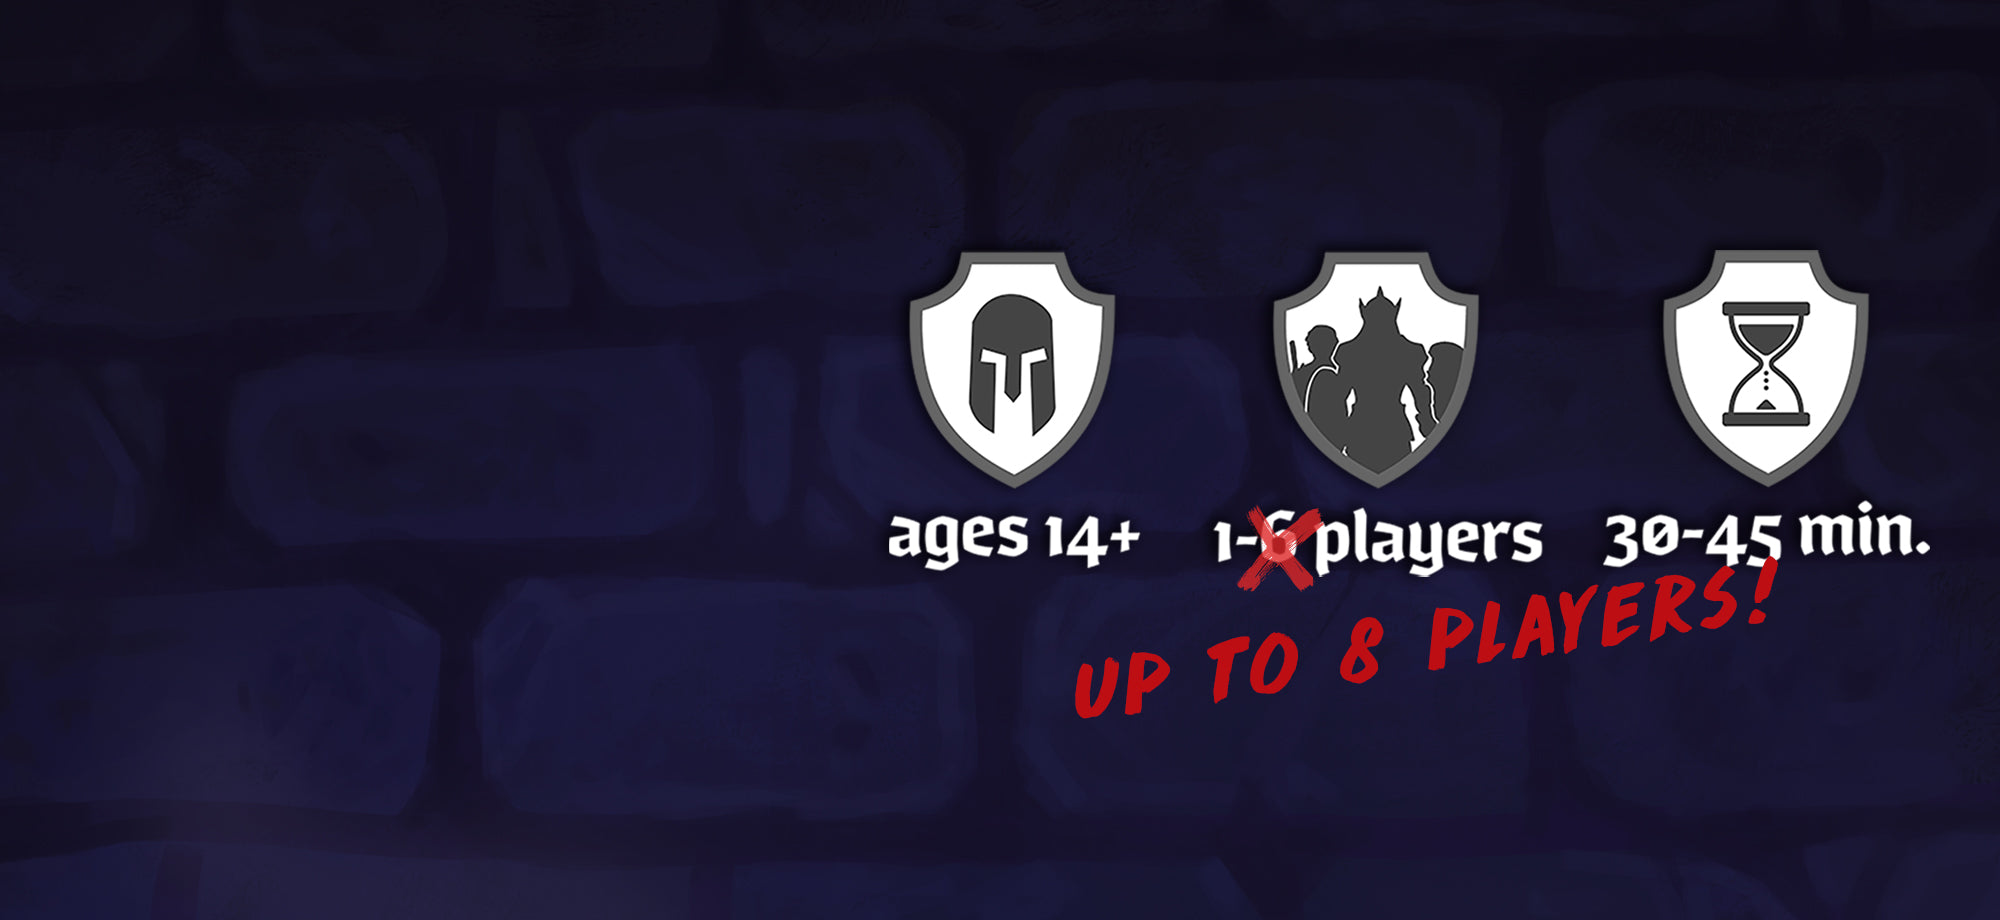 Graphic badges indicating Ages 14+ for 1-6 players, 30-45 minutes. The "6" is crossed out and "Up to 8 players" is written in red as if in correction